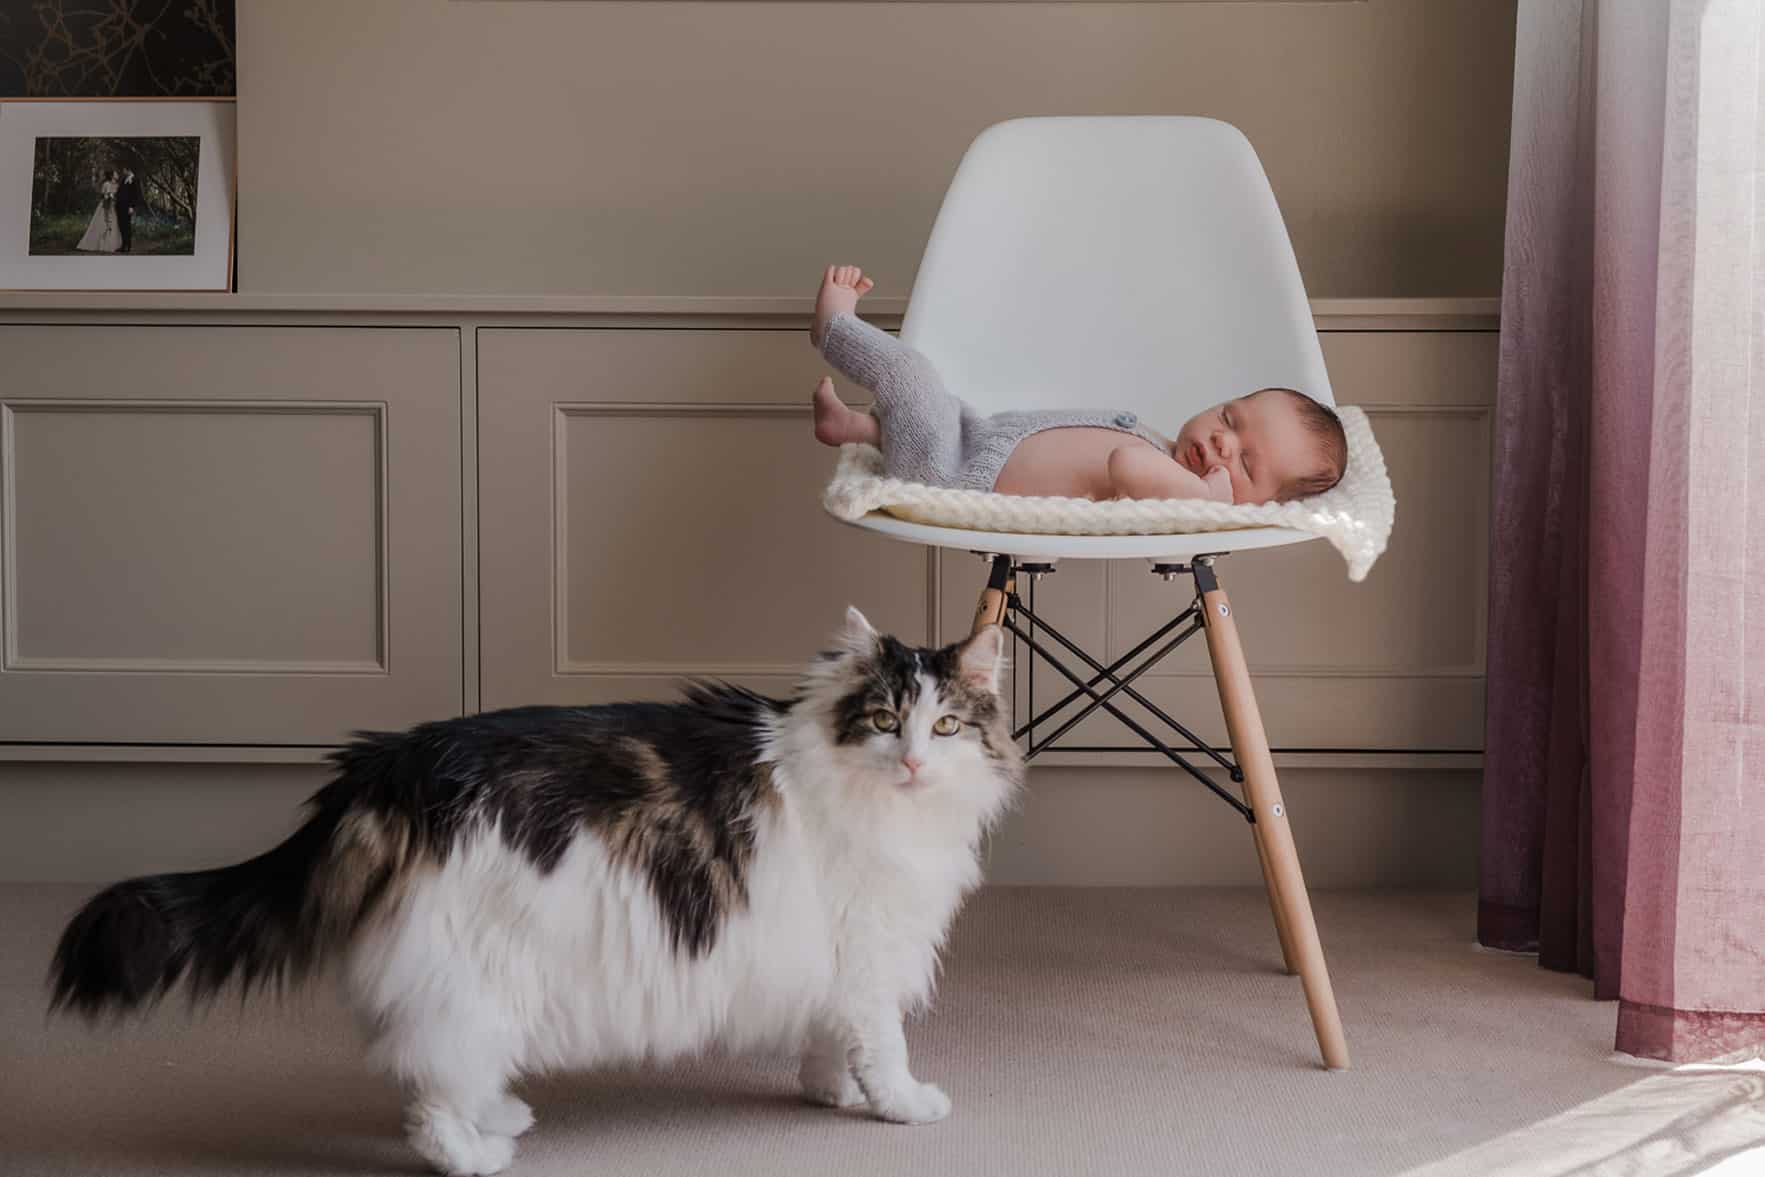 Baby and cat photography diy at home